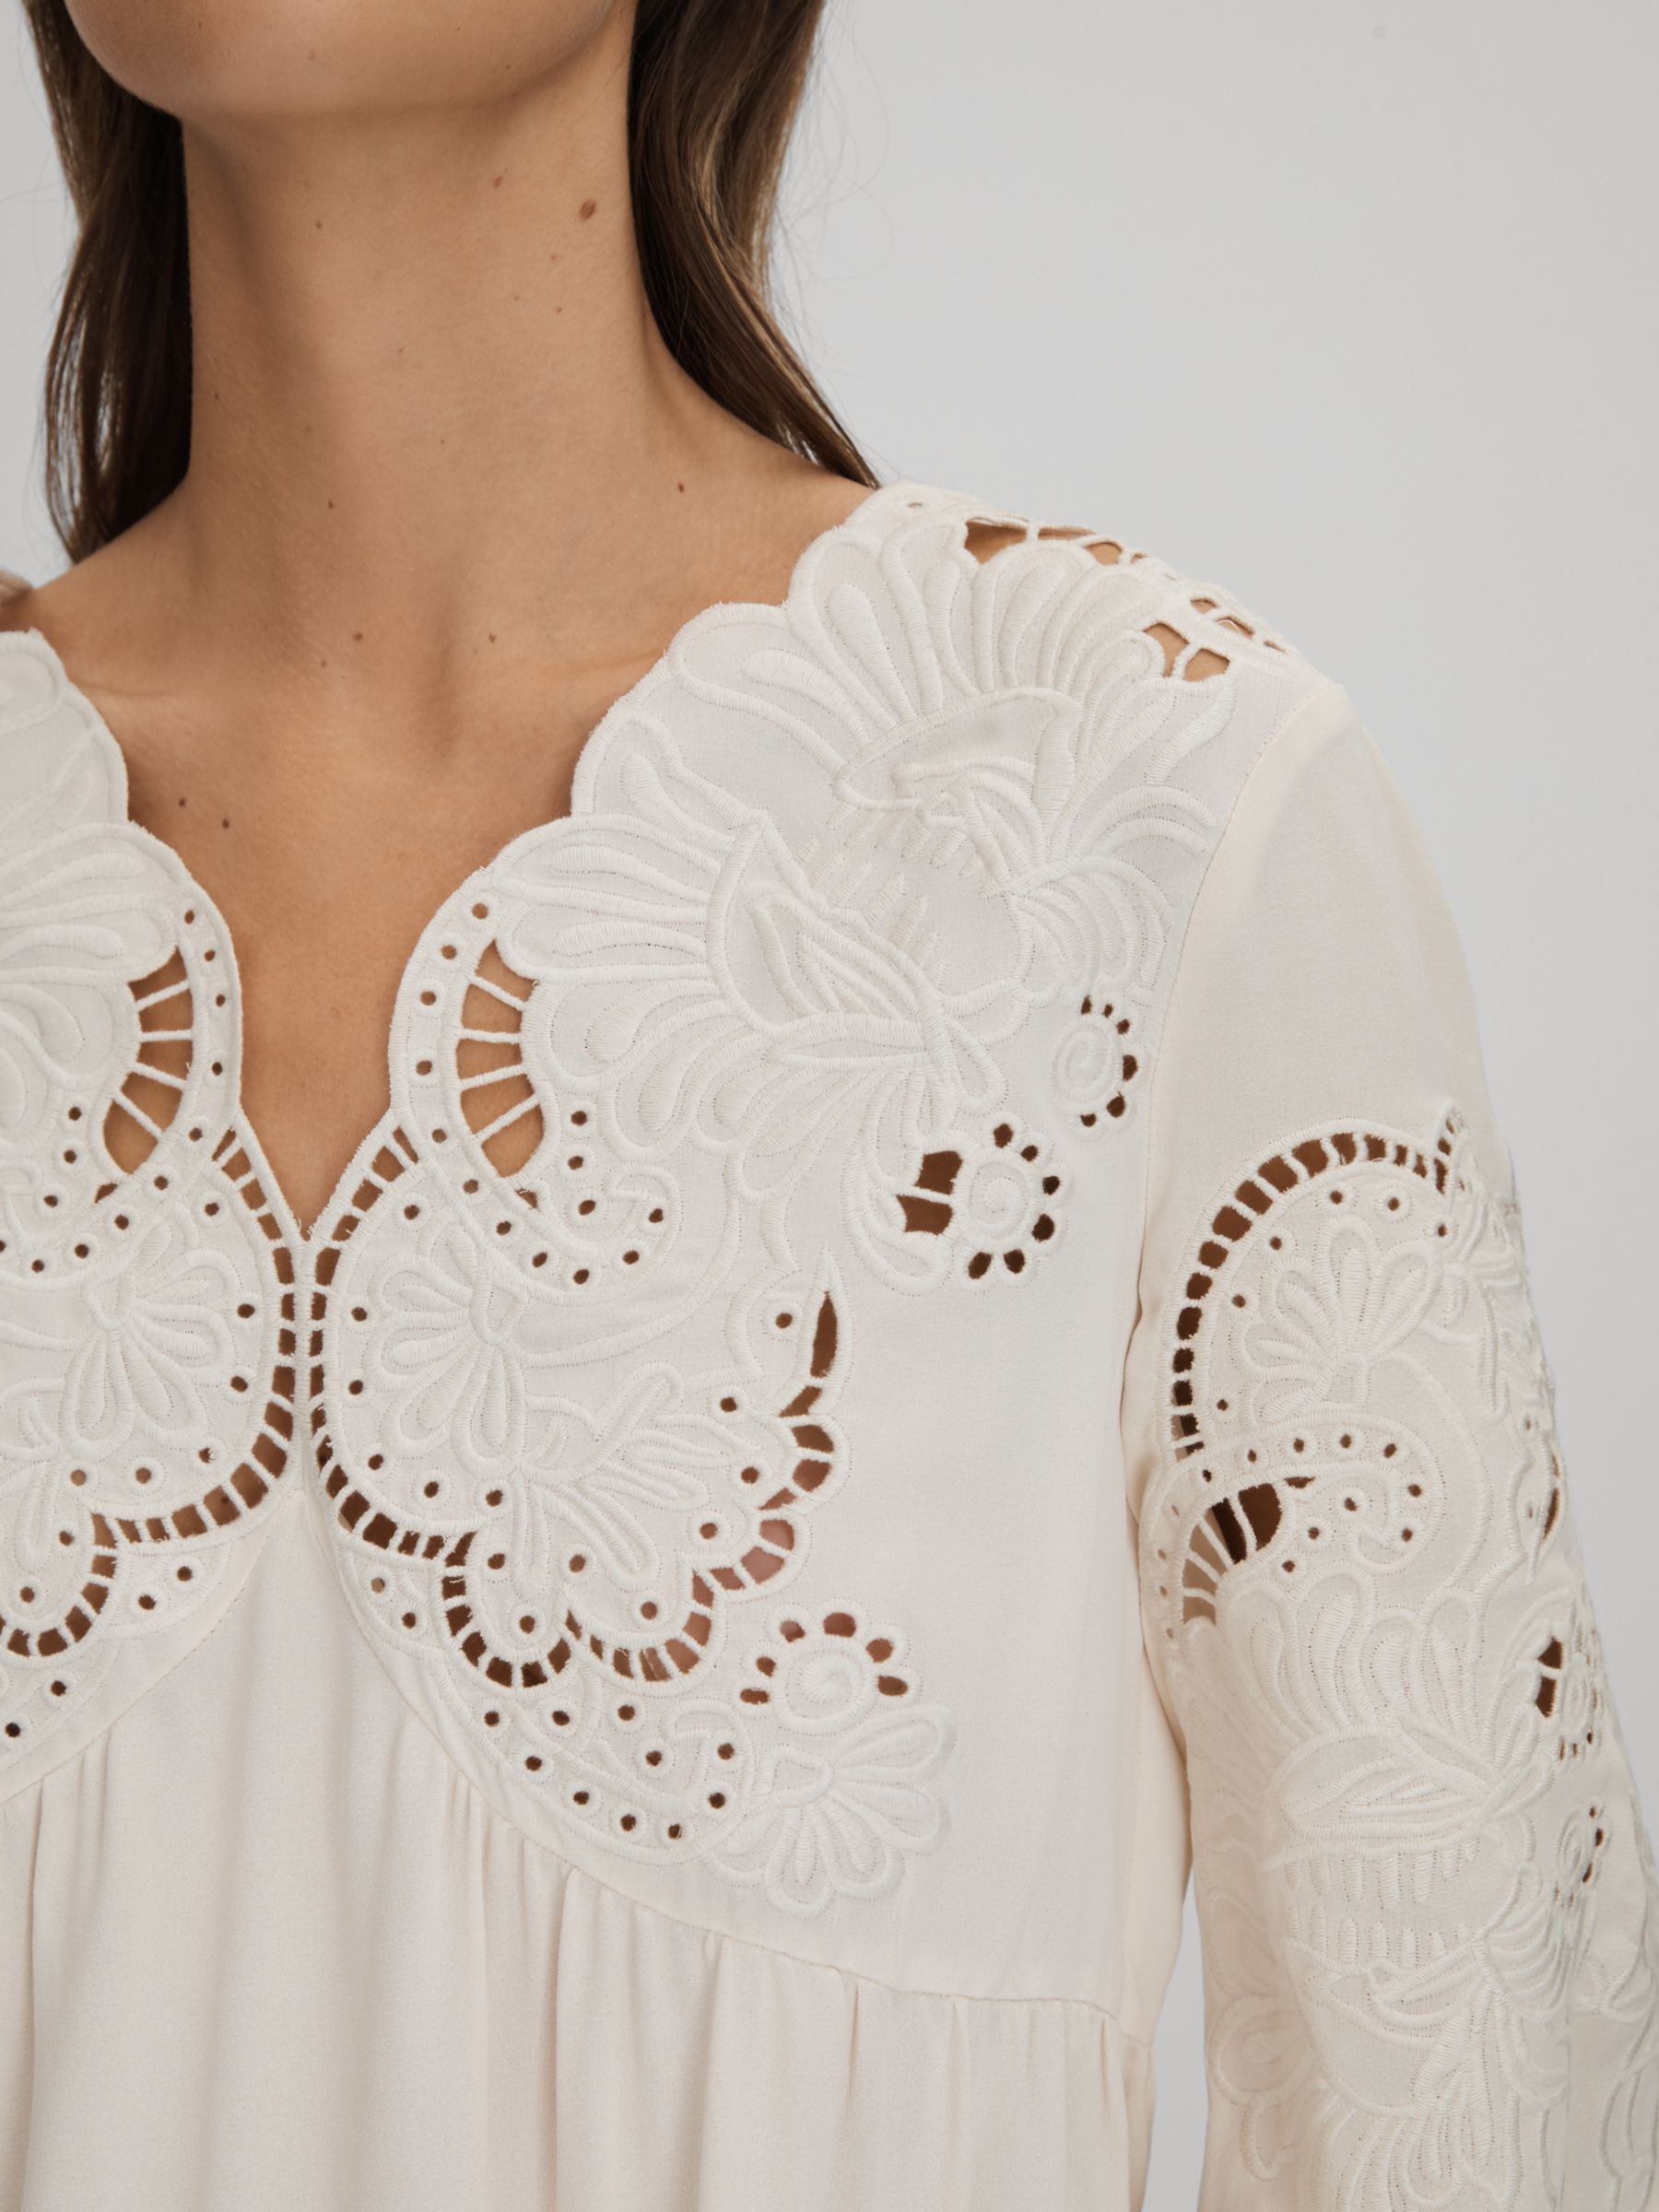 Reiss Noa Embroidered Blouse, Cream, 6